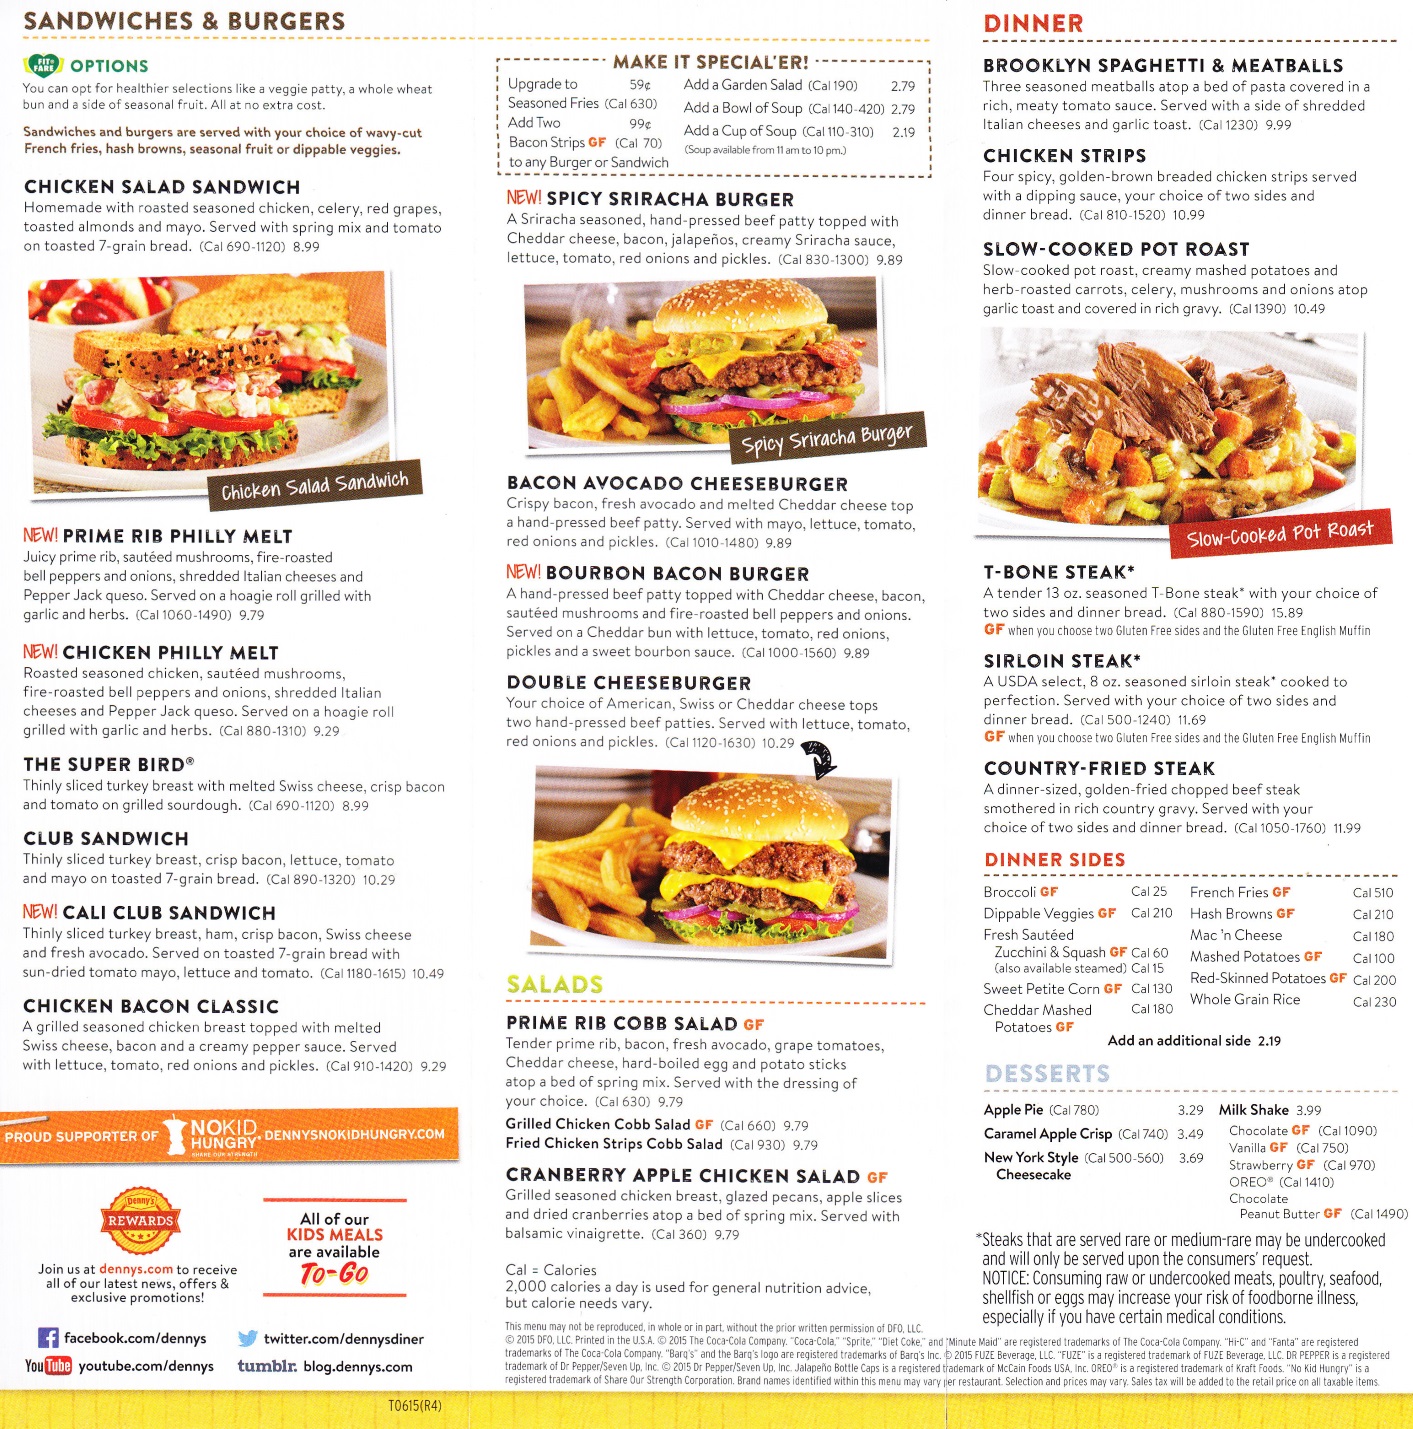 Denny's locations in Miami - See hours, menu, directions, tips, and photos.